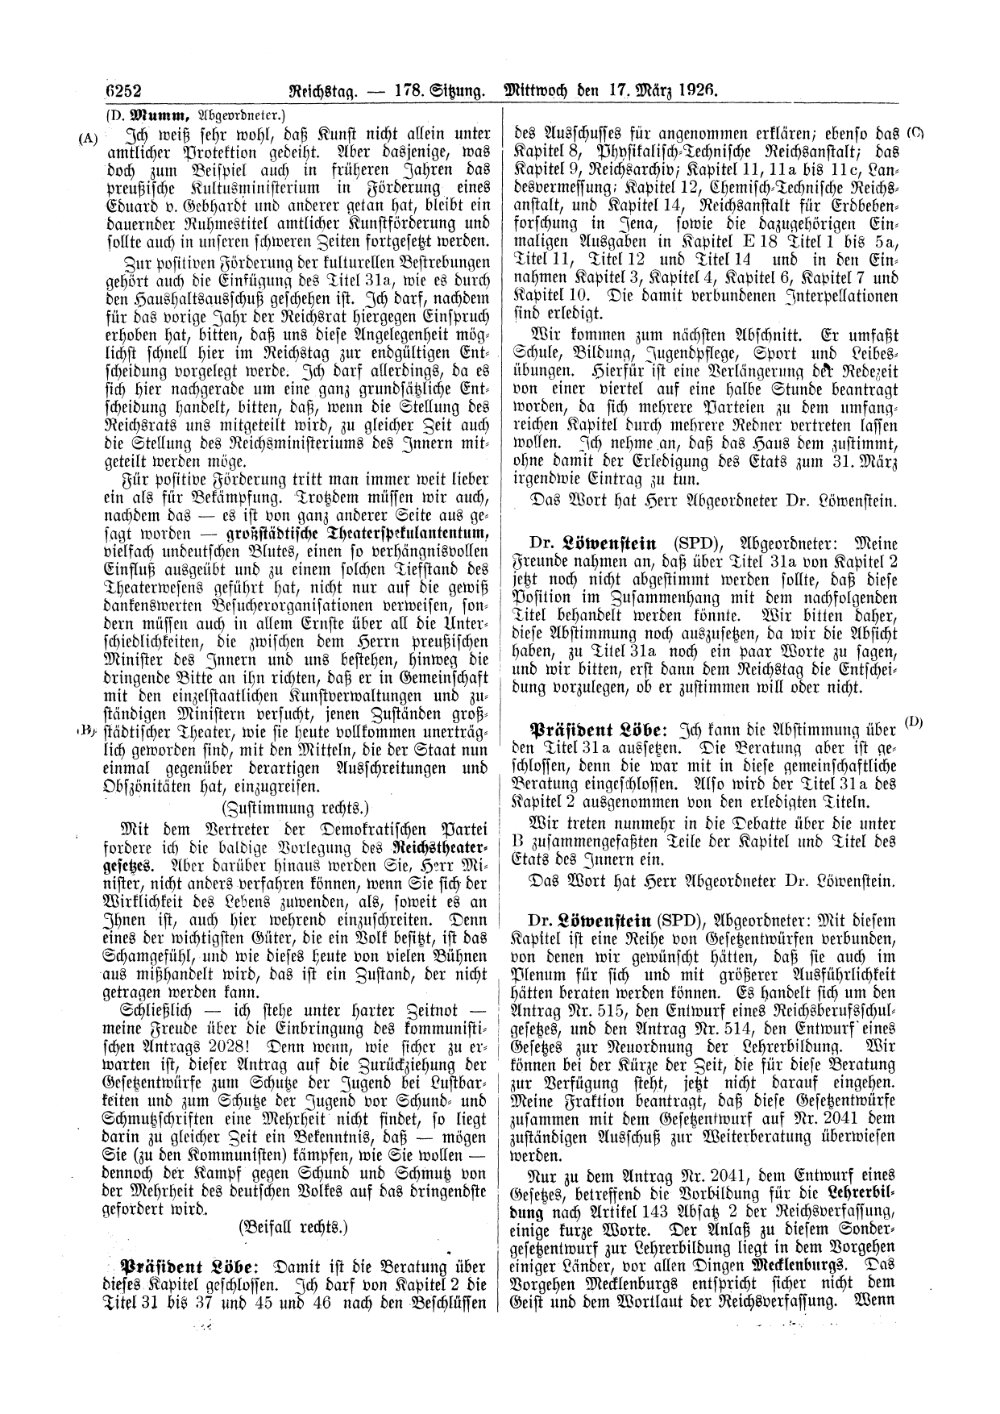 Scan of page 6252